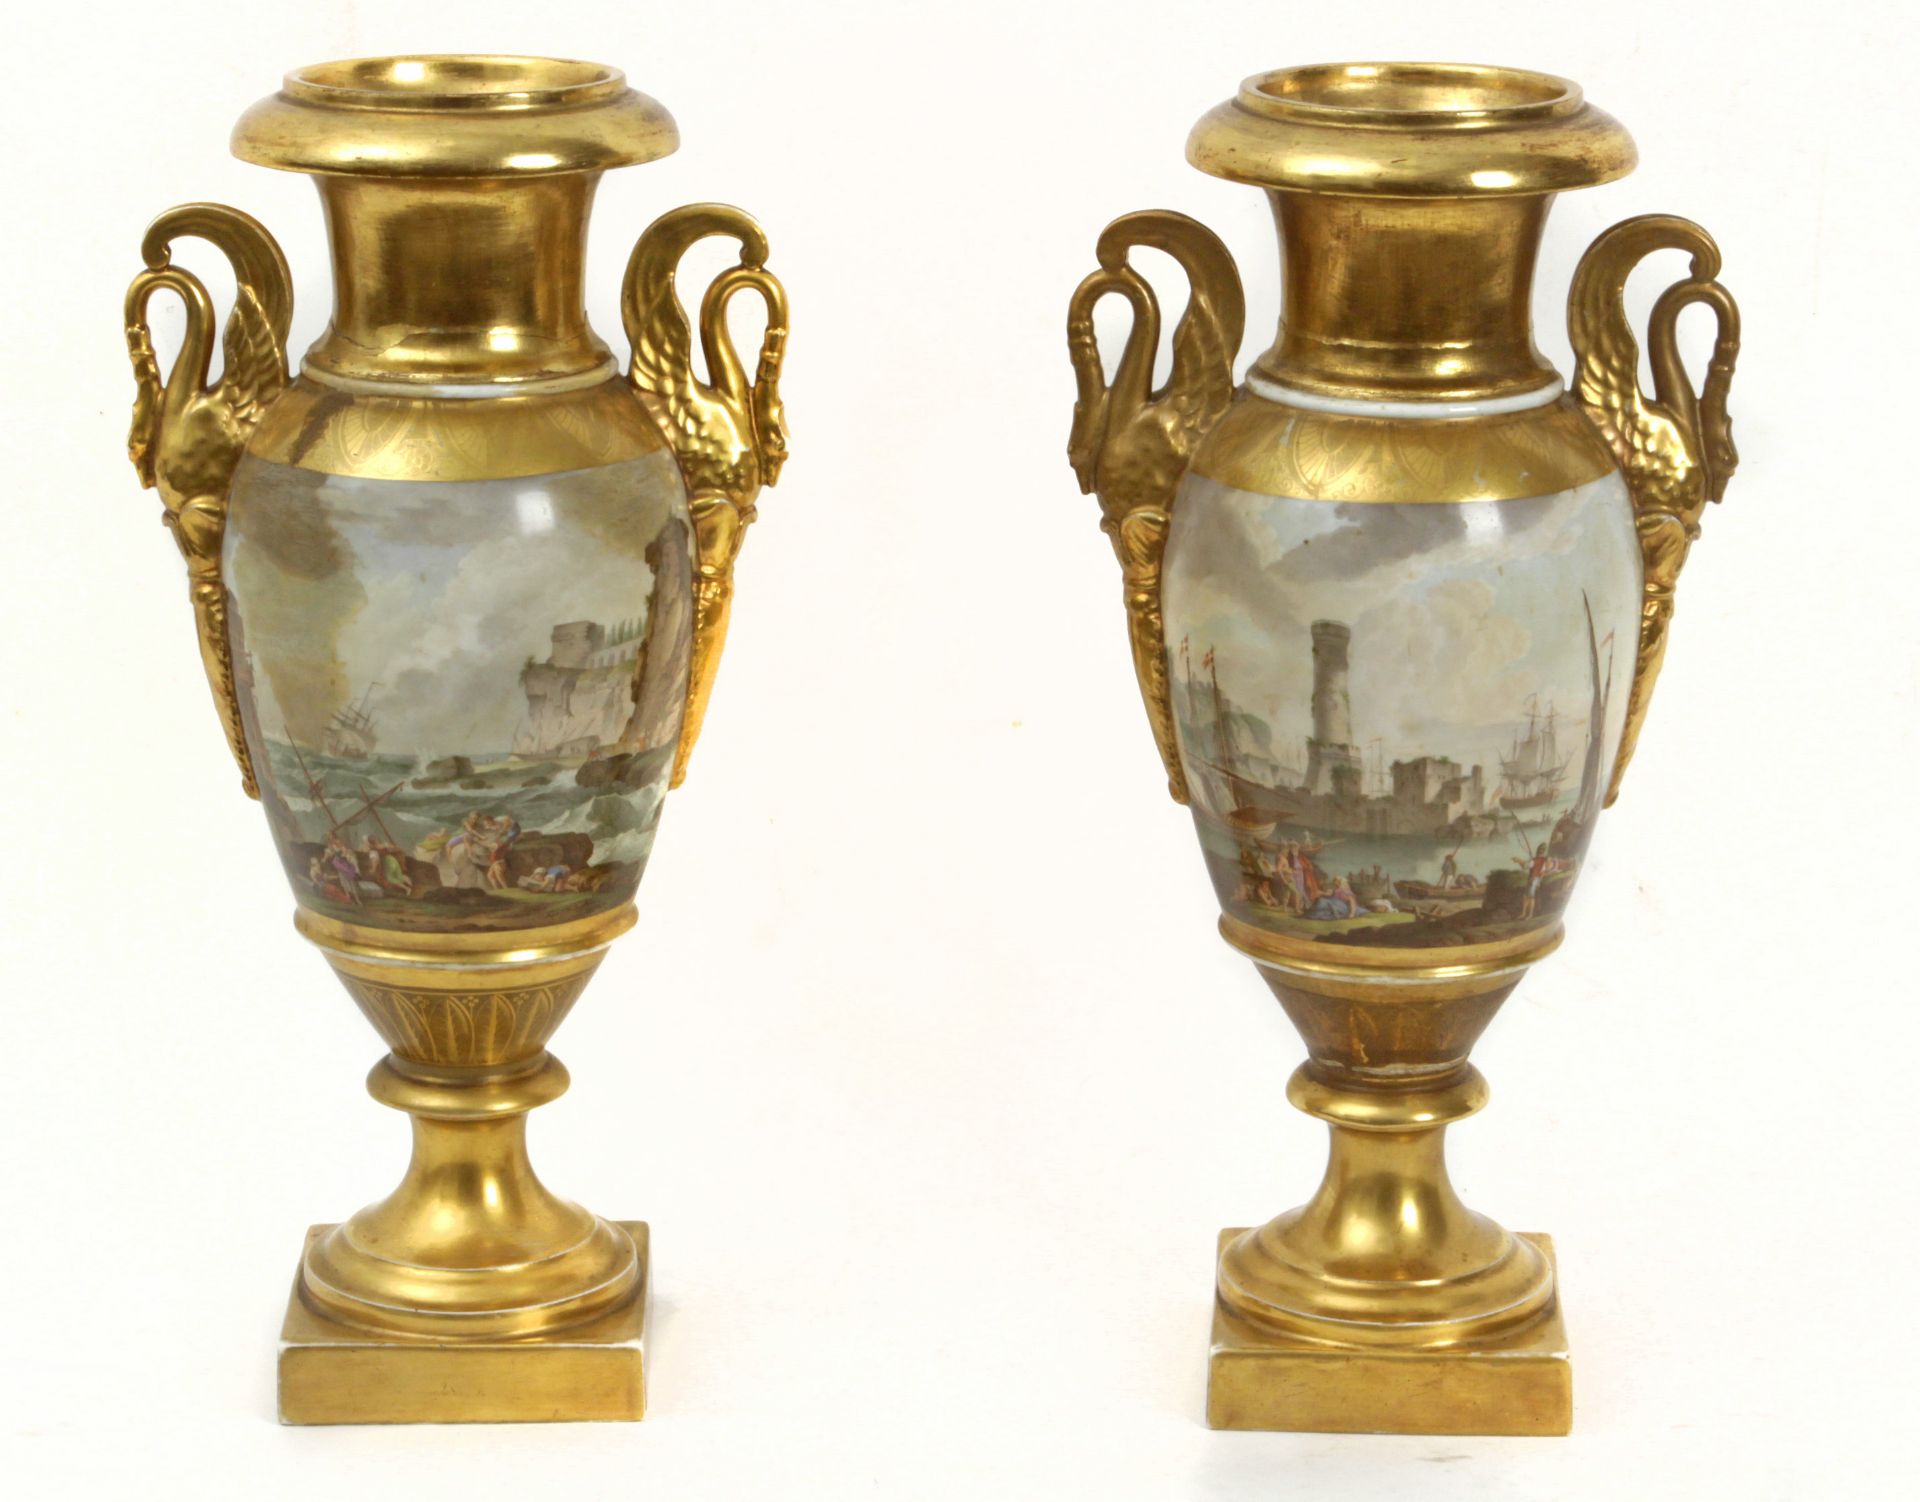 A pair of 19th century French vases in Old Paris porcelain